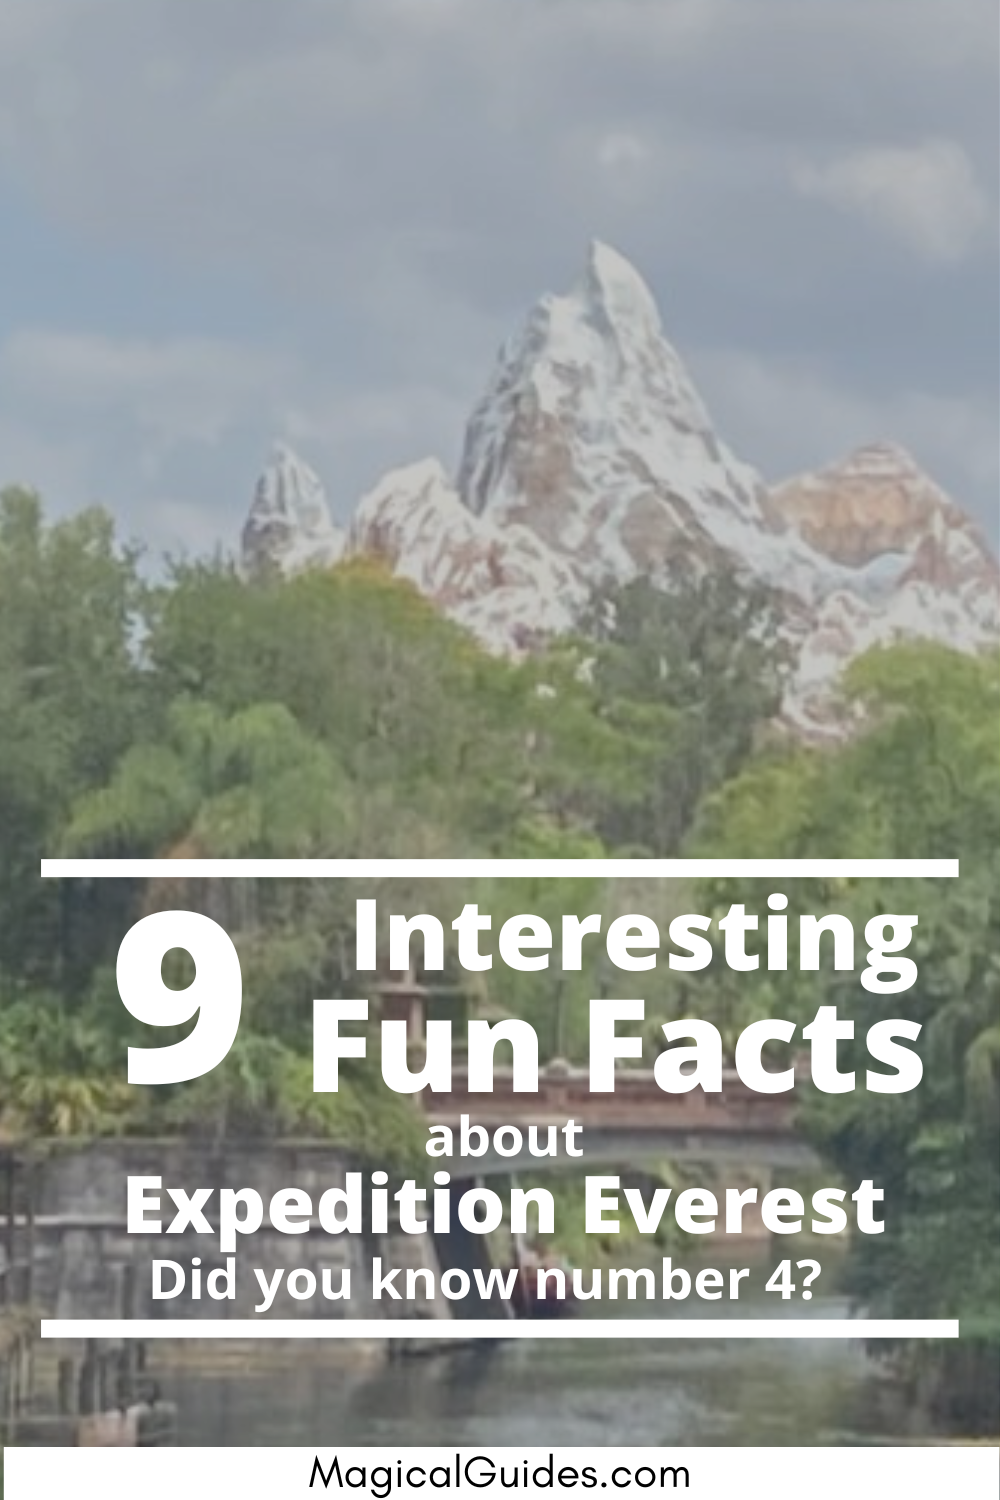 One of the most iconic rides in Disney's Animal Kingdom is Expedition Everest. Did you know these 9 facts about the ride?